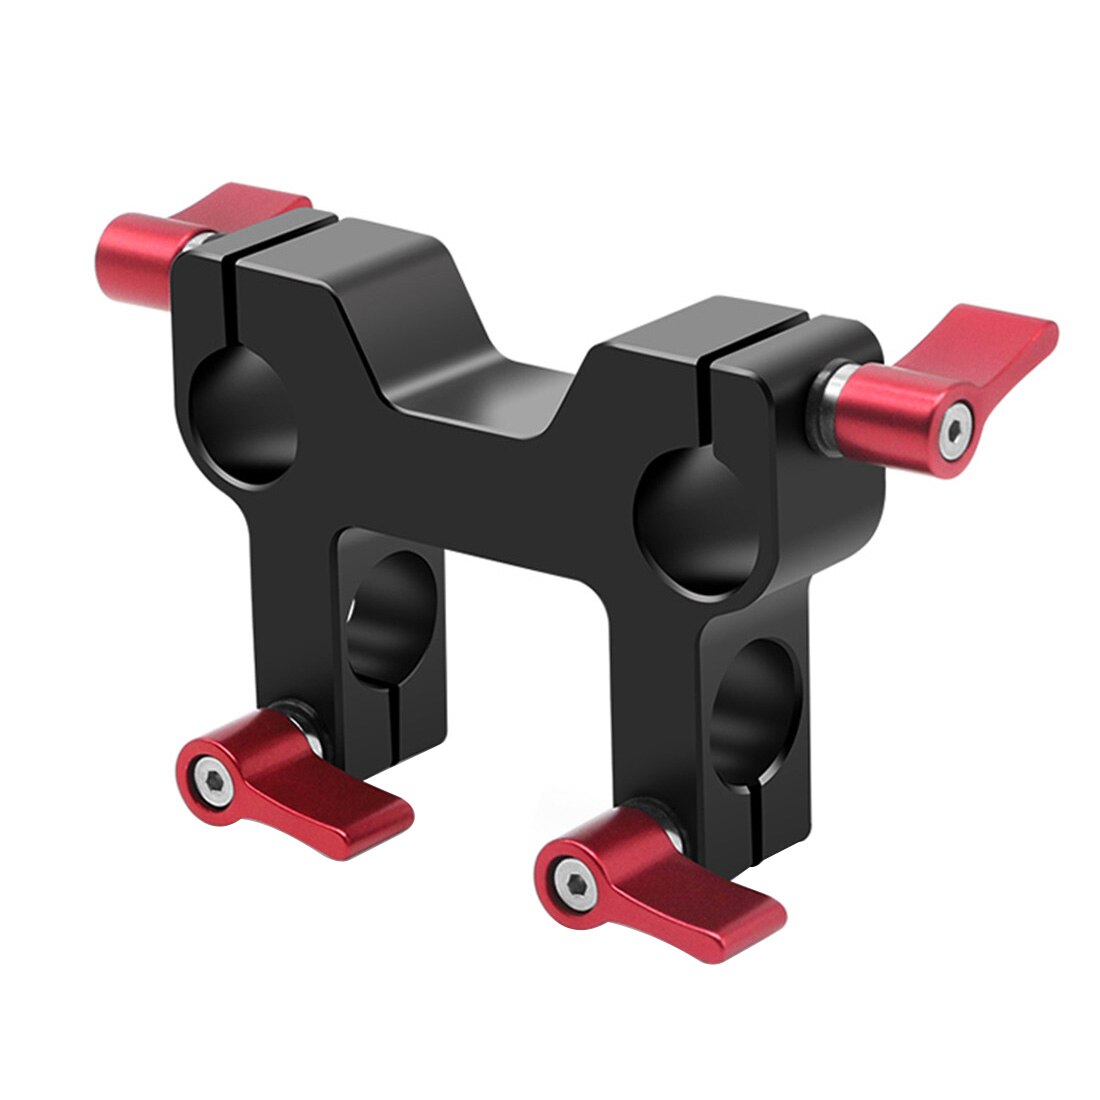 15mm Rod Clamp Railblock For Camera 15mm Rail Support System w 1/4 -20 Mounting Points For DSLR Camera Shoulder Rig Follow Focus